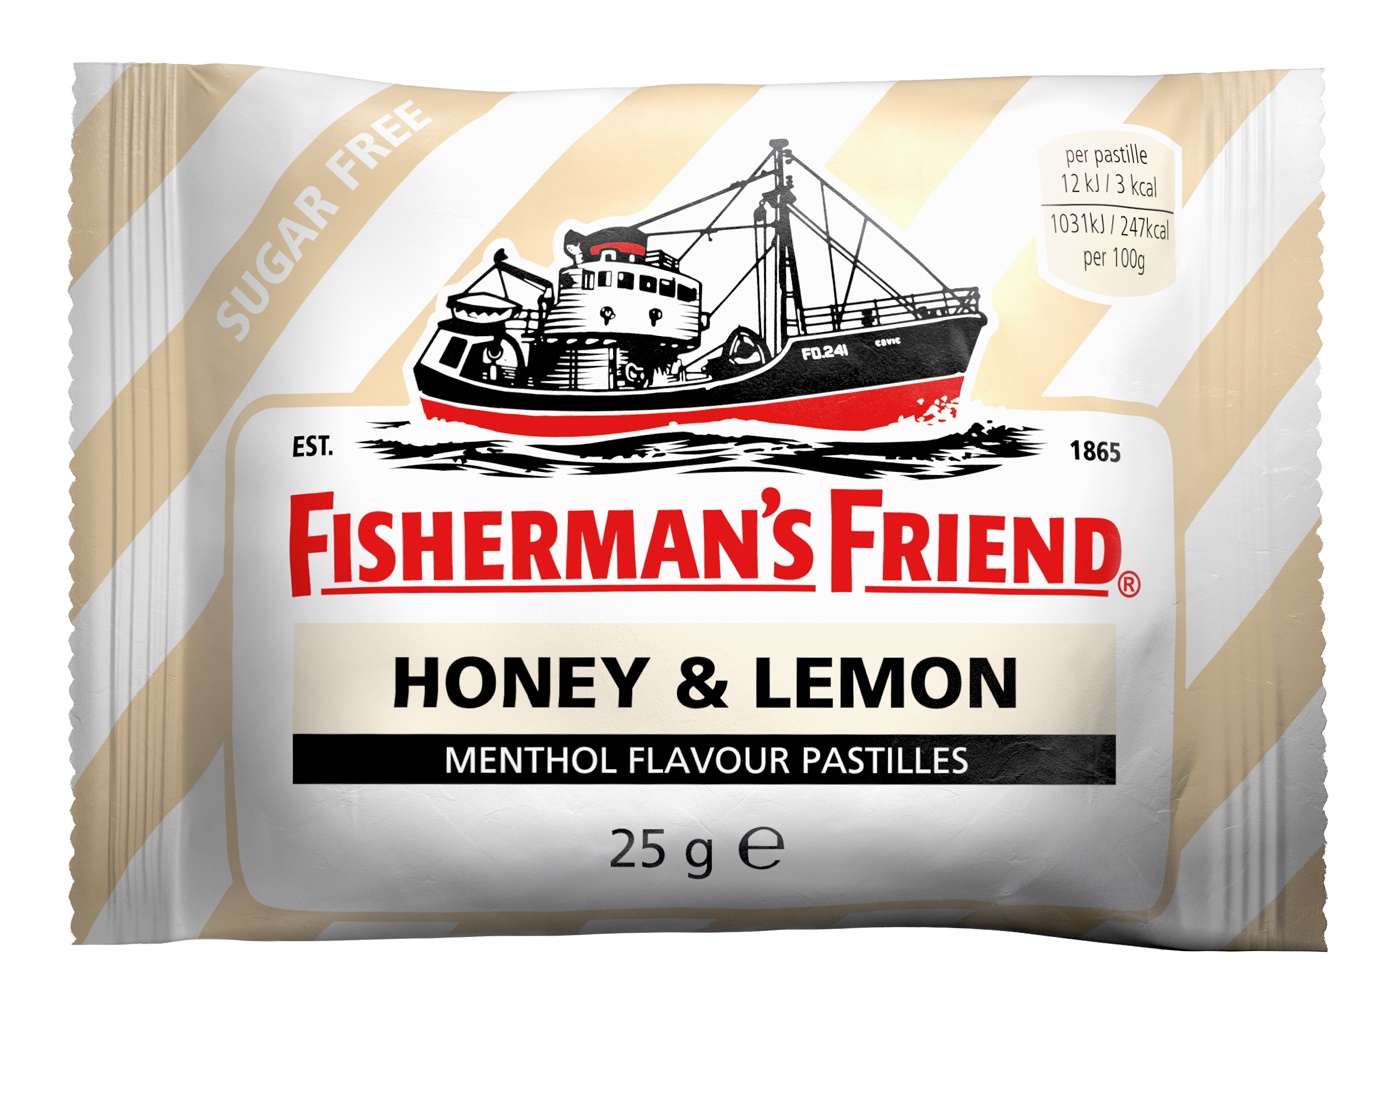 Fisherman’s Friend urgers retailers to stock up this hay fever season